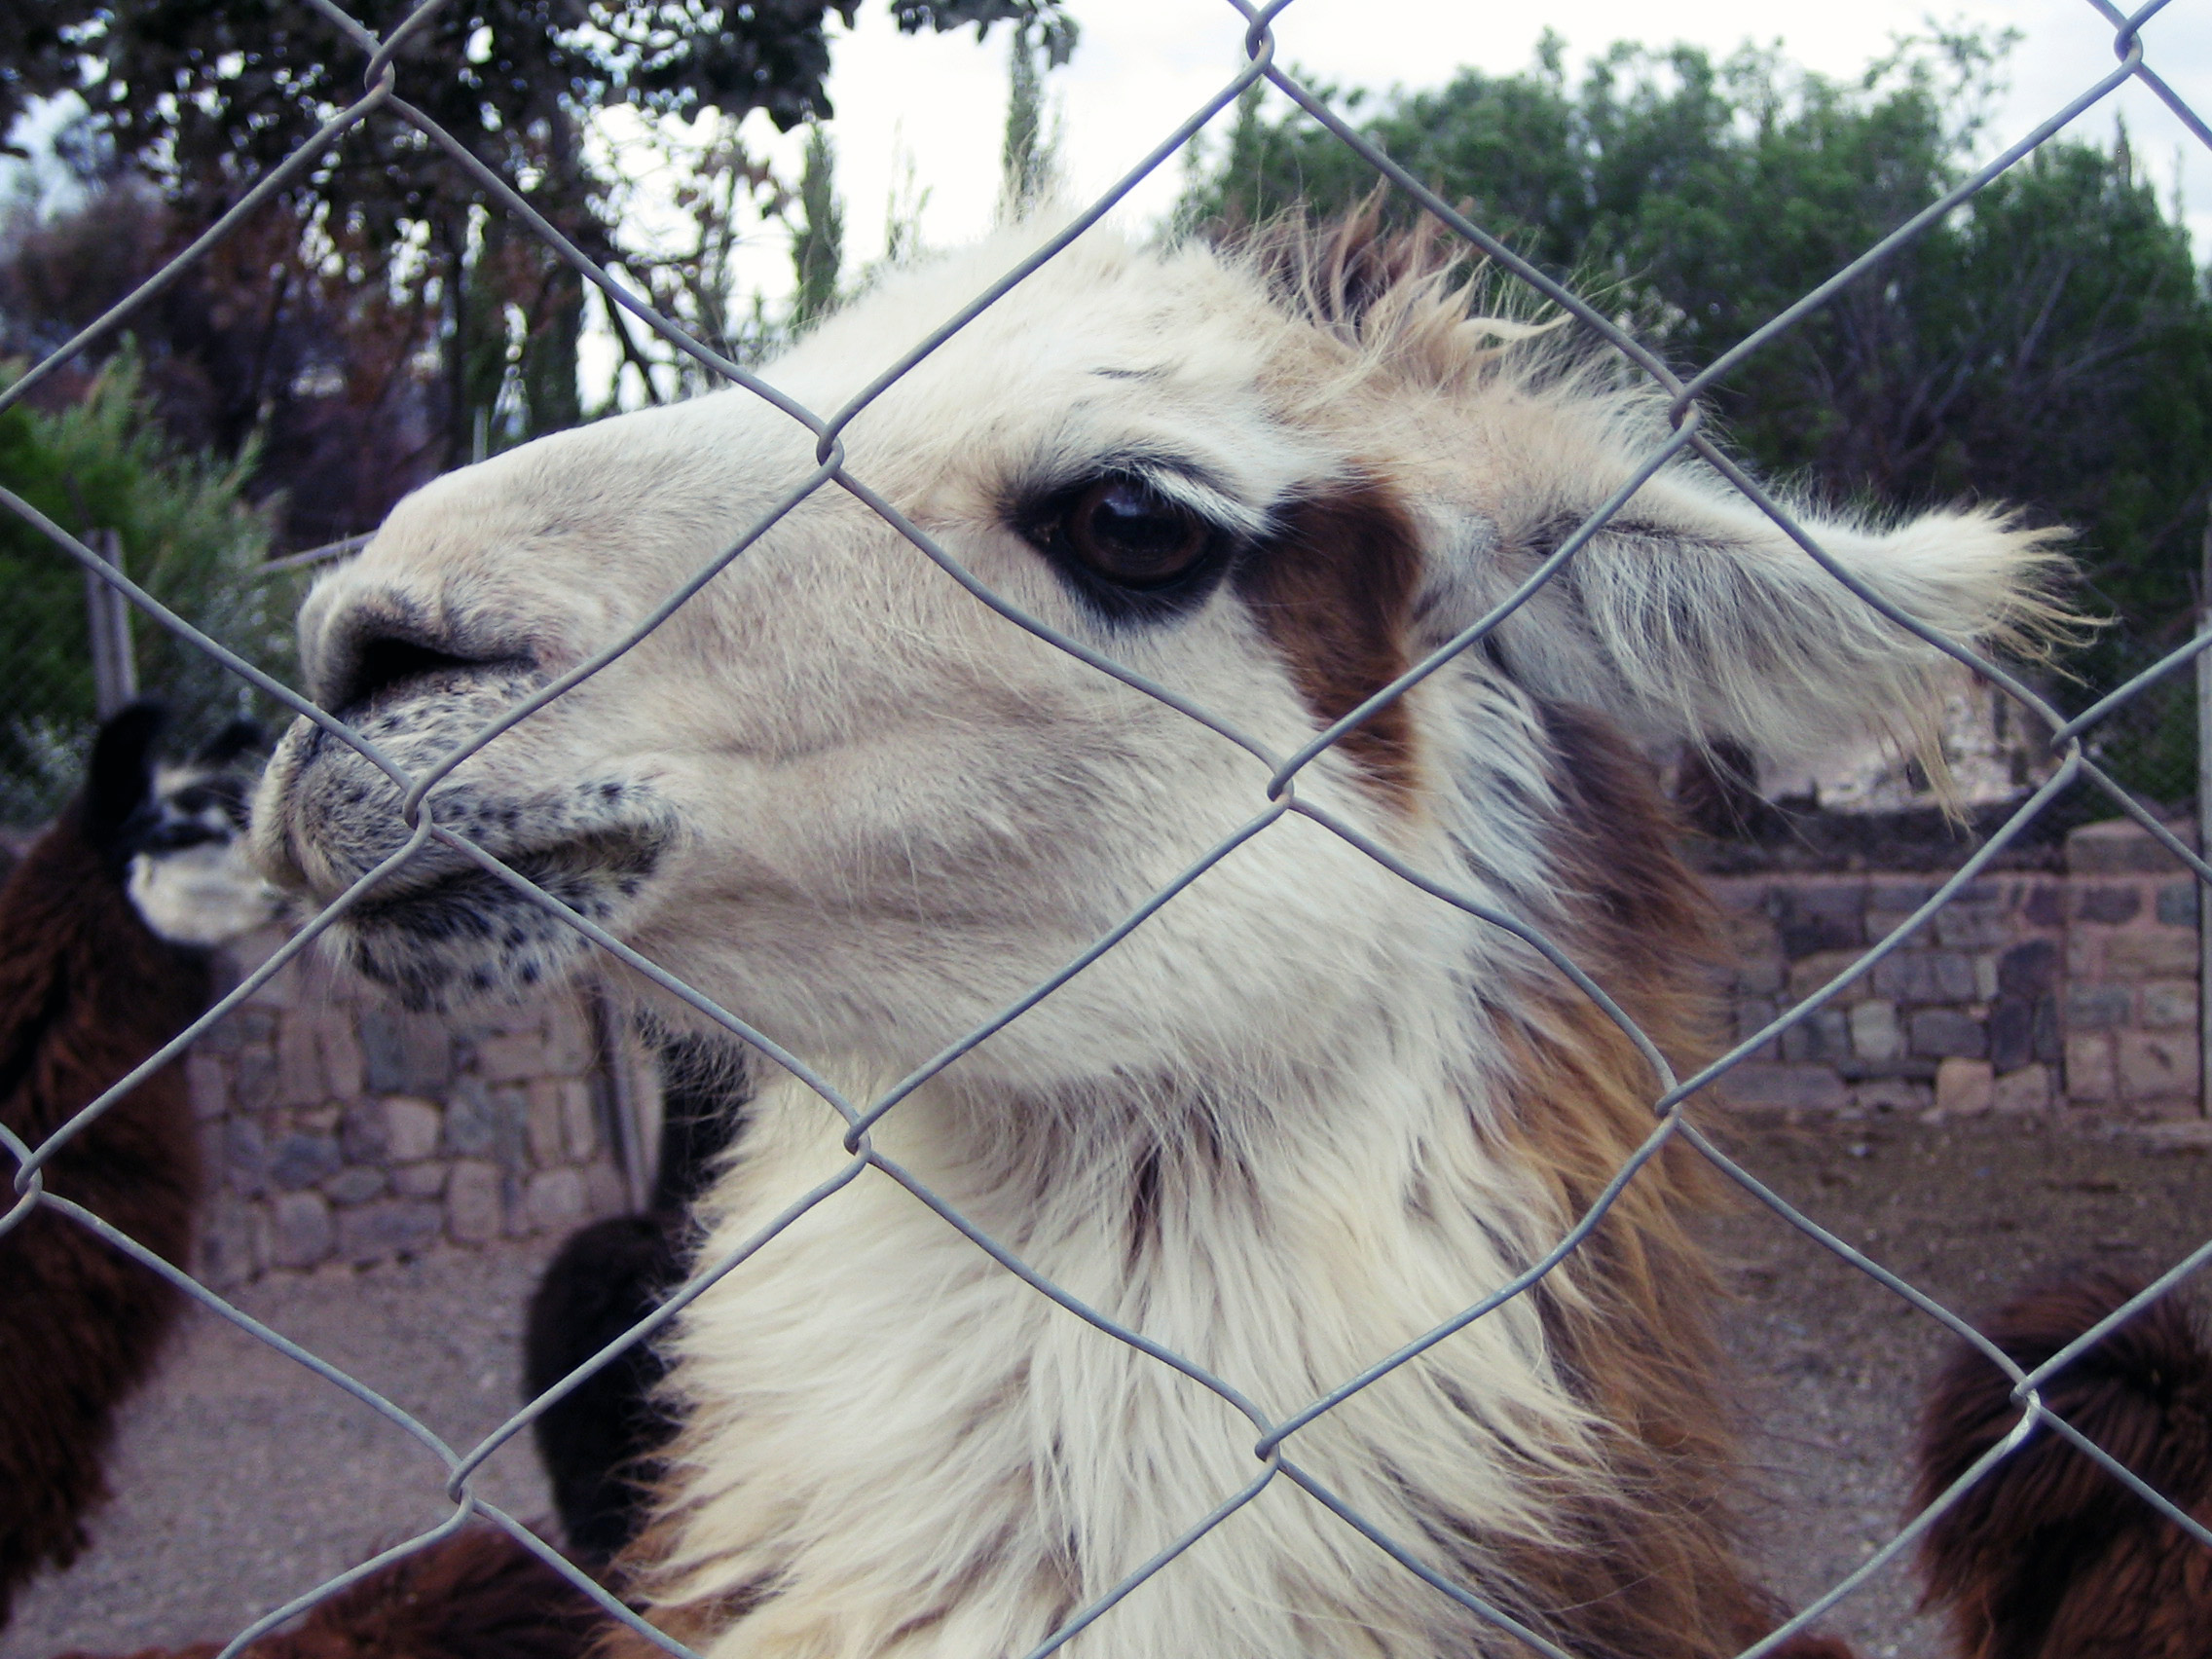 up close and personal with my llama friend